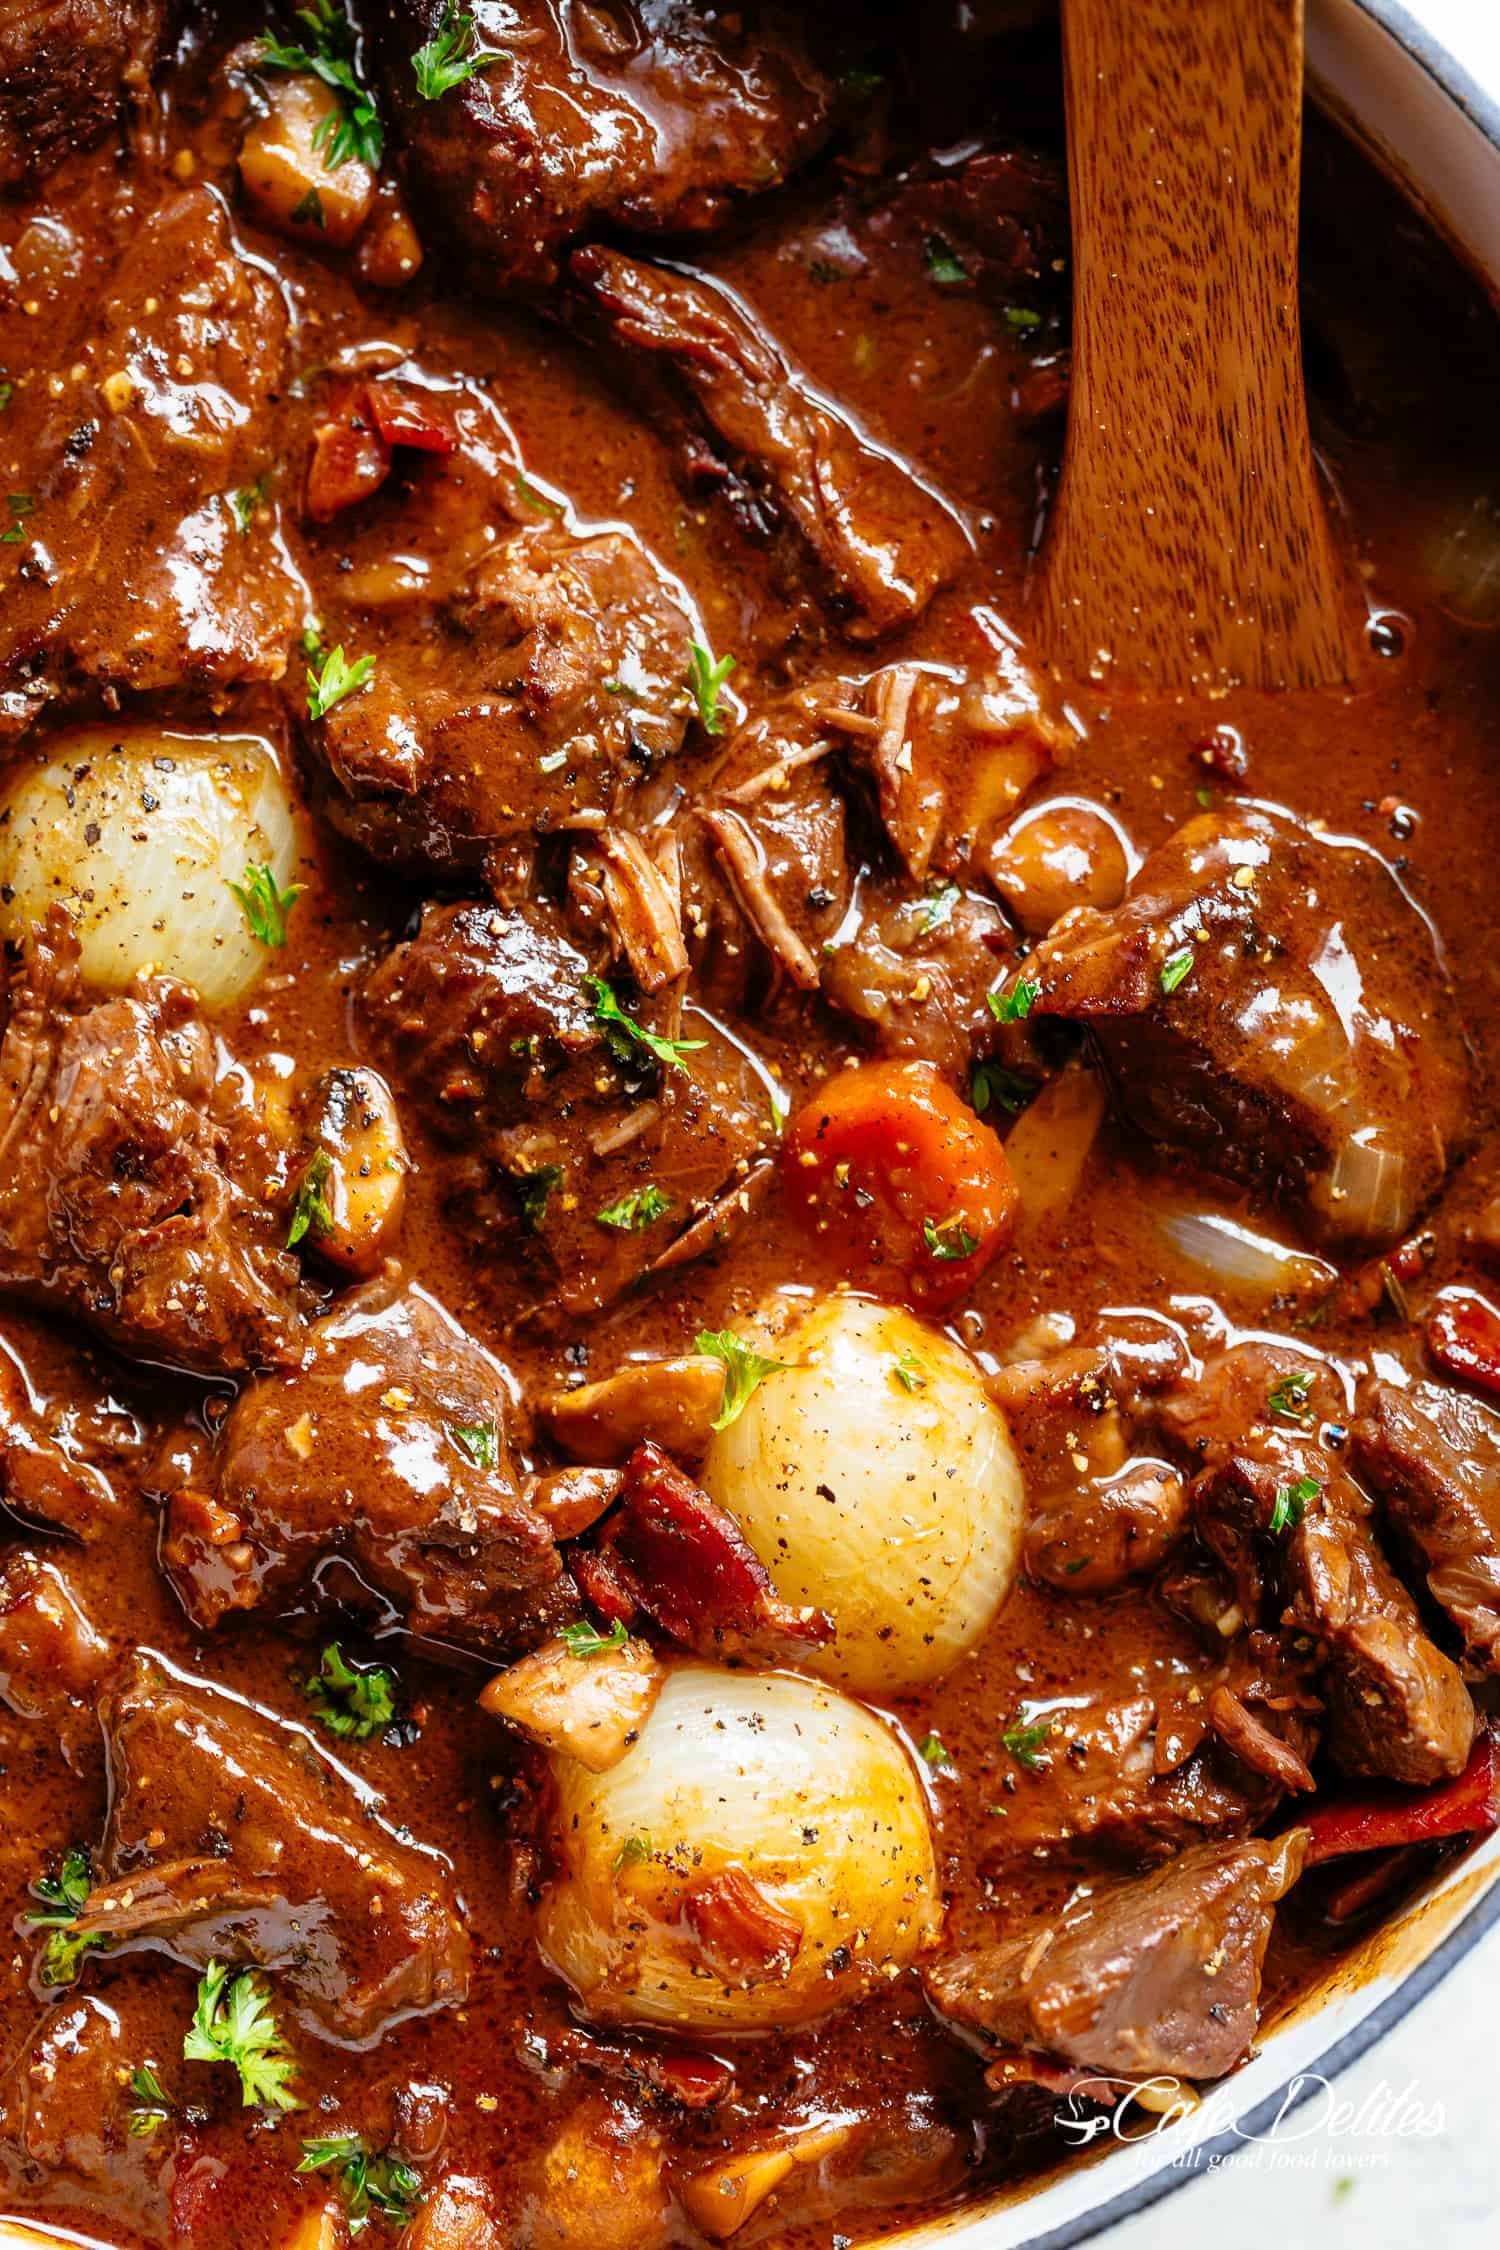 Tender beef chunks in a rich red wine gravy in a white cast iron casserole dish with a wooden spoon. | cafedelites.com